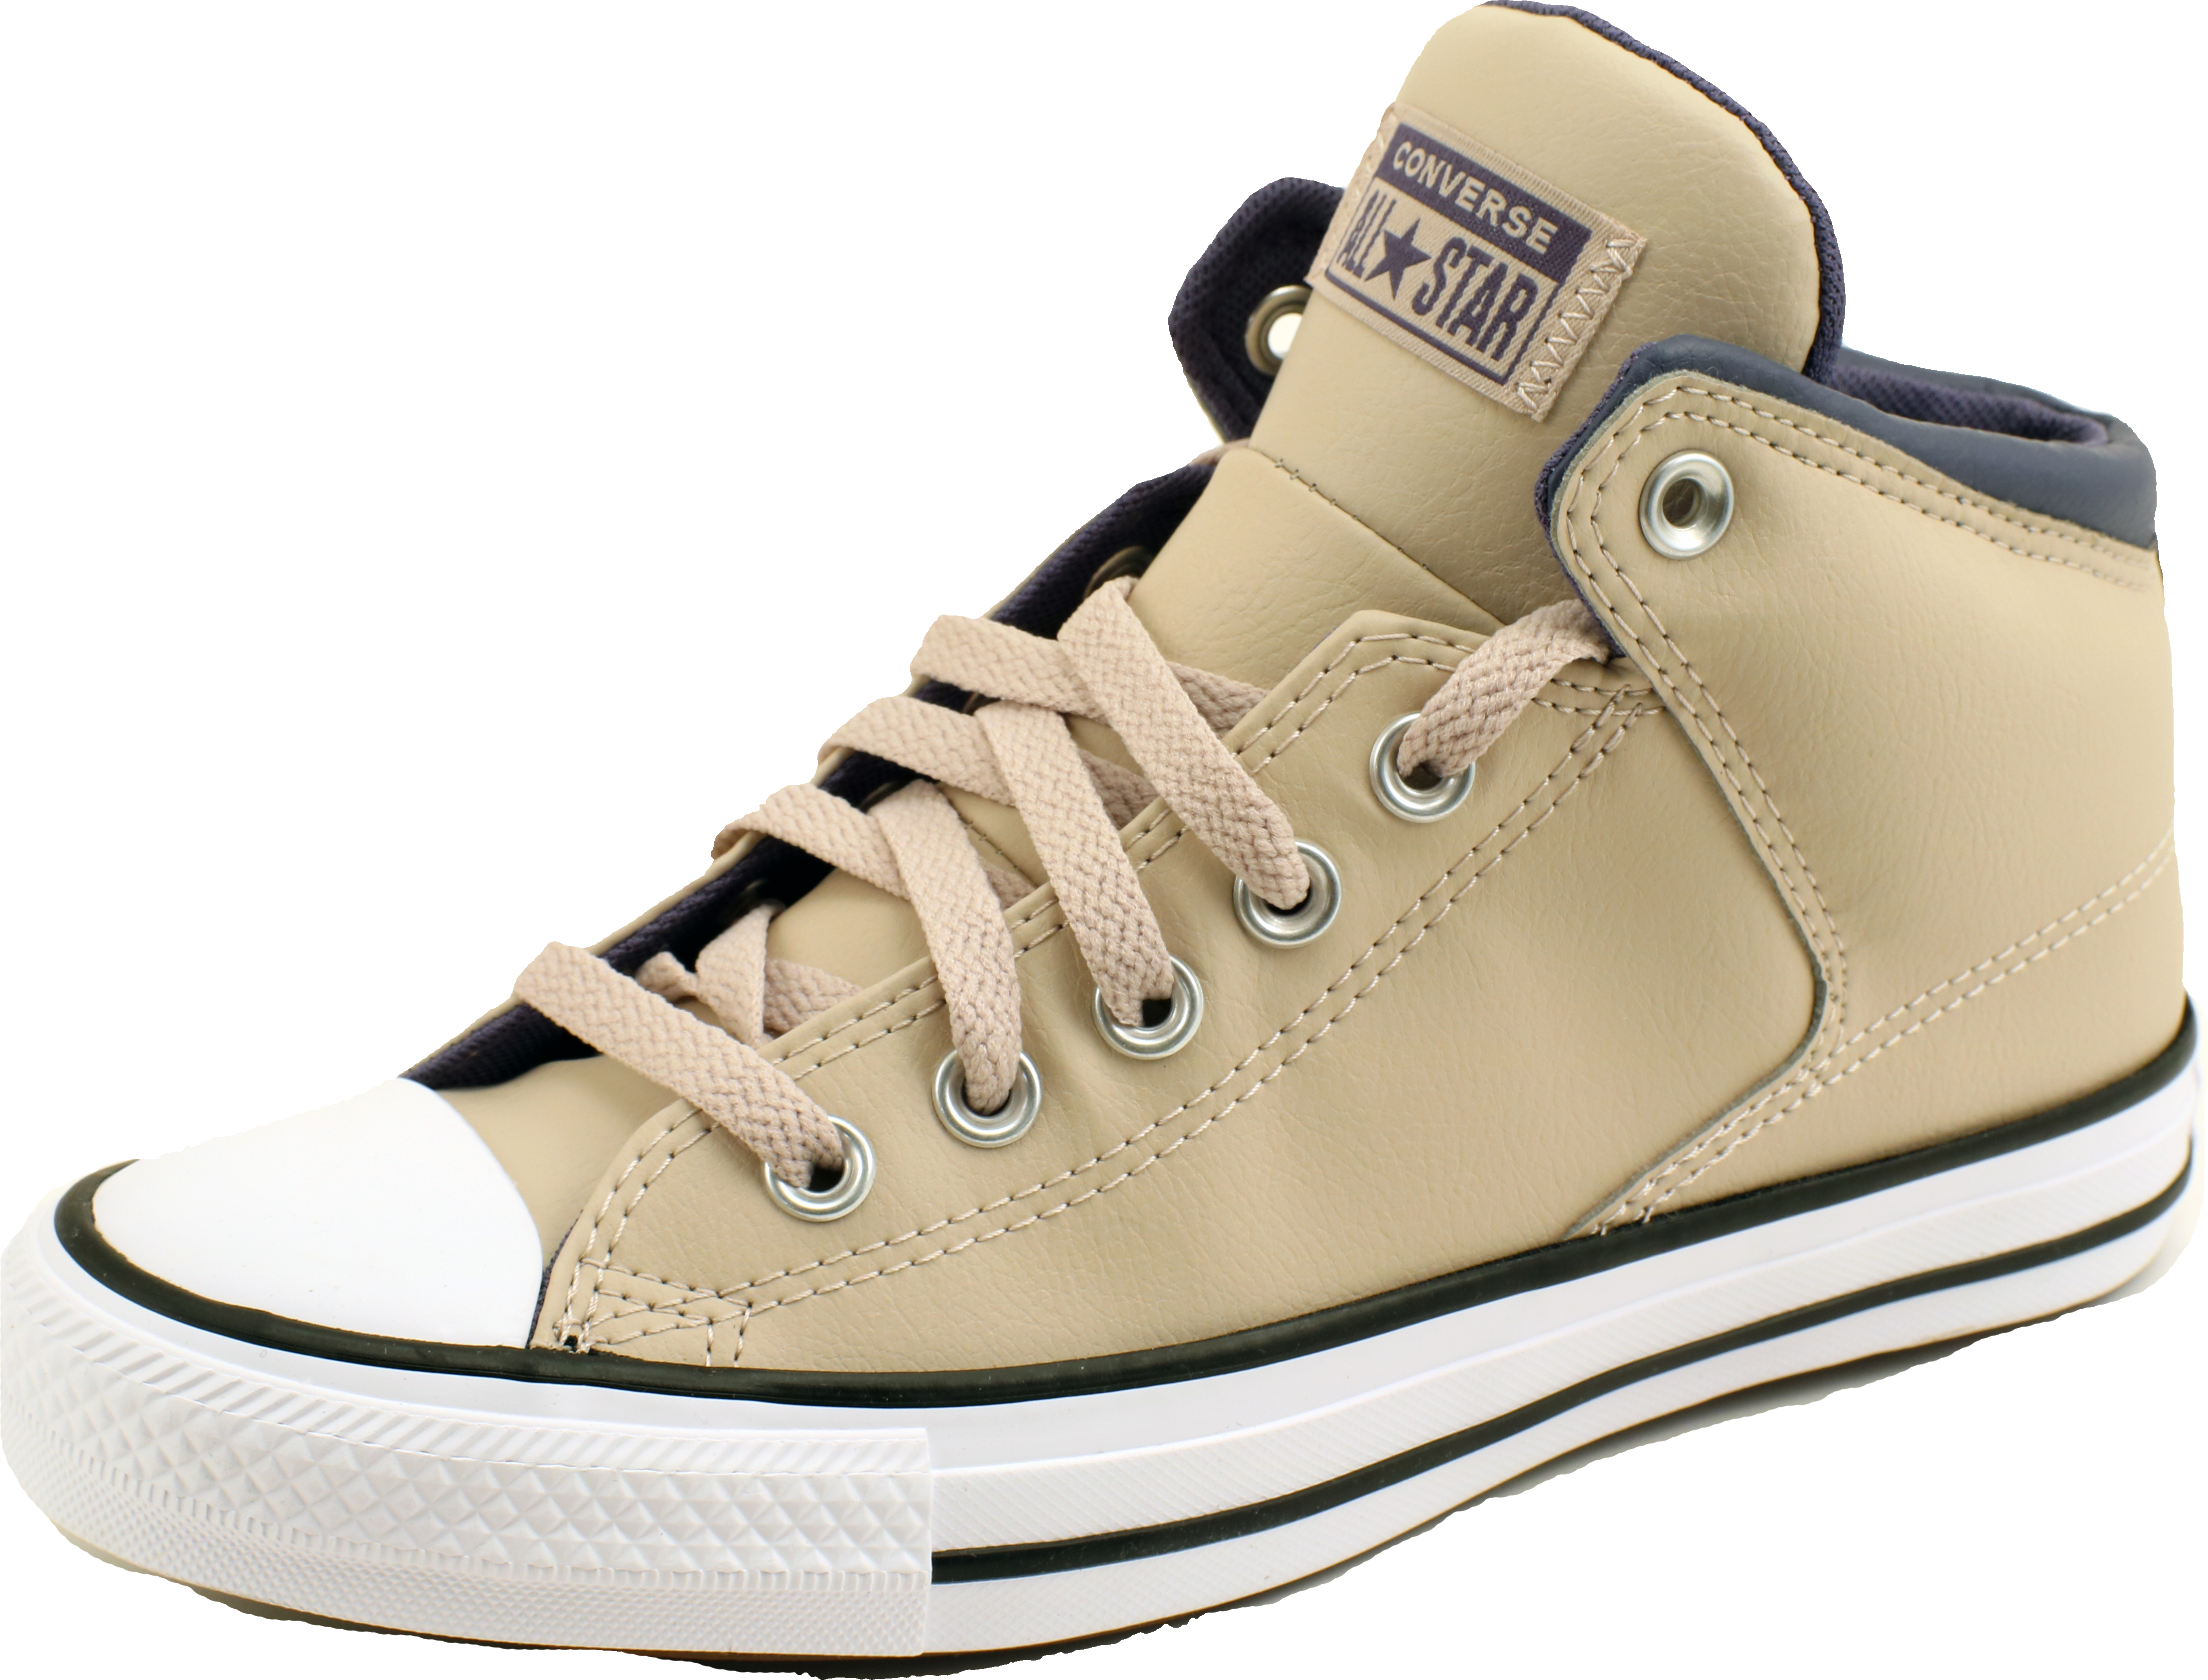 Chuck Taylor All Star High Street - Mid - String / Steel / White Imitation leather